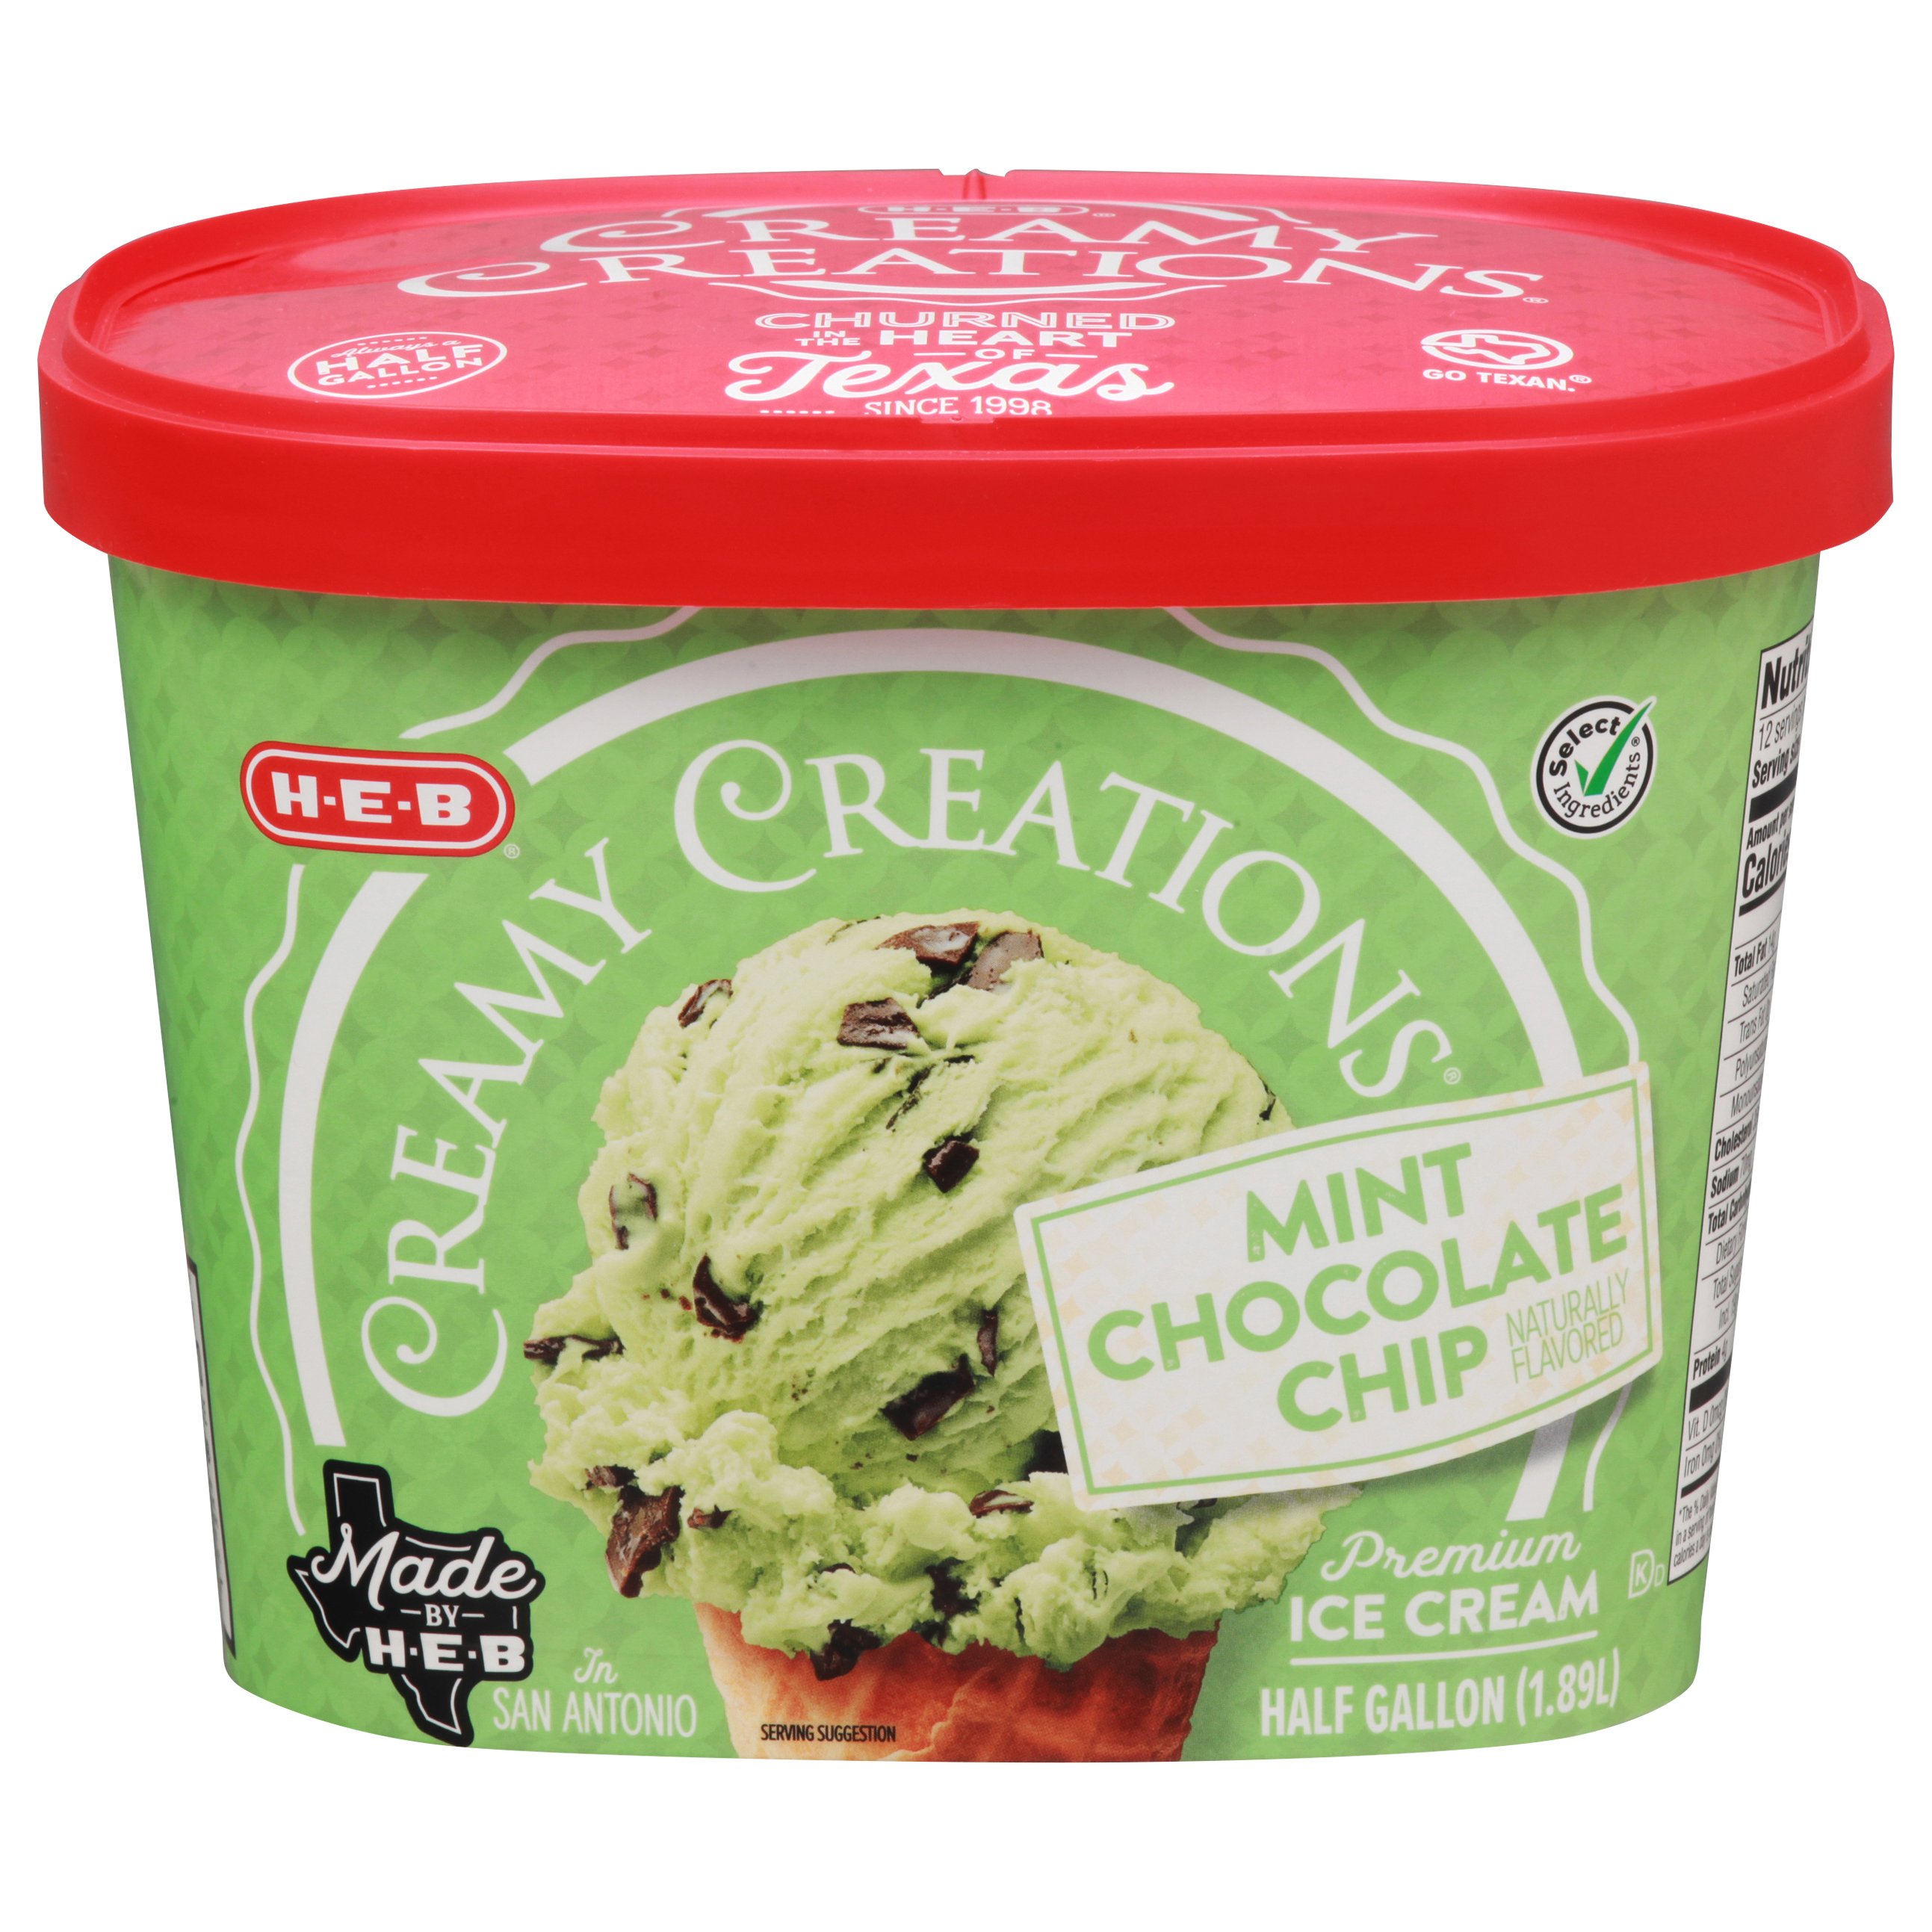 Blue Bell Chocolate Chip Cookie Dough Ice Cream - Shop Ice Cream at H-E-B